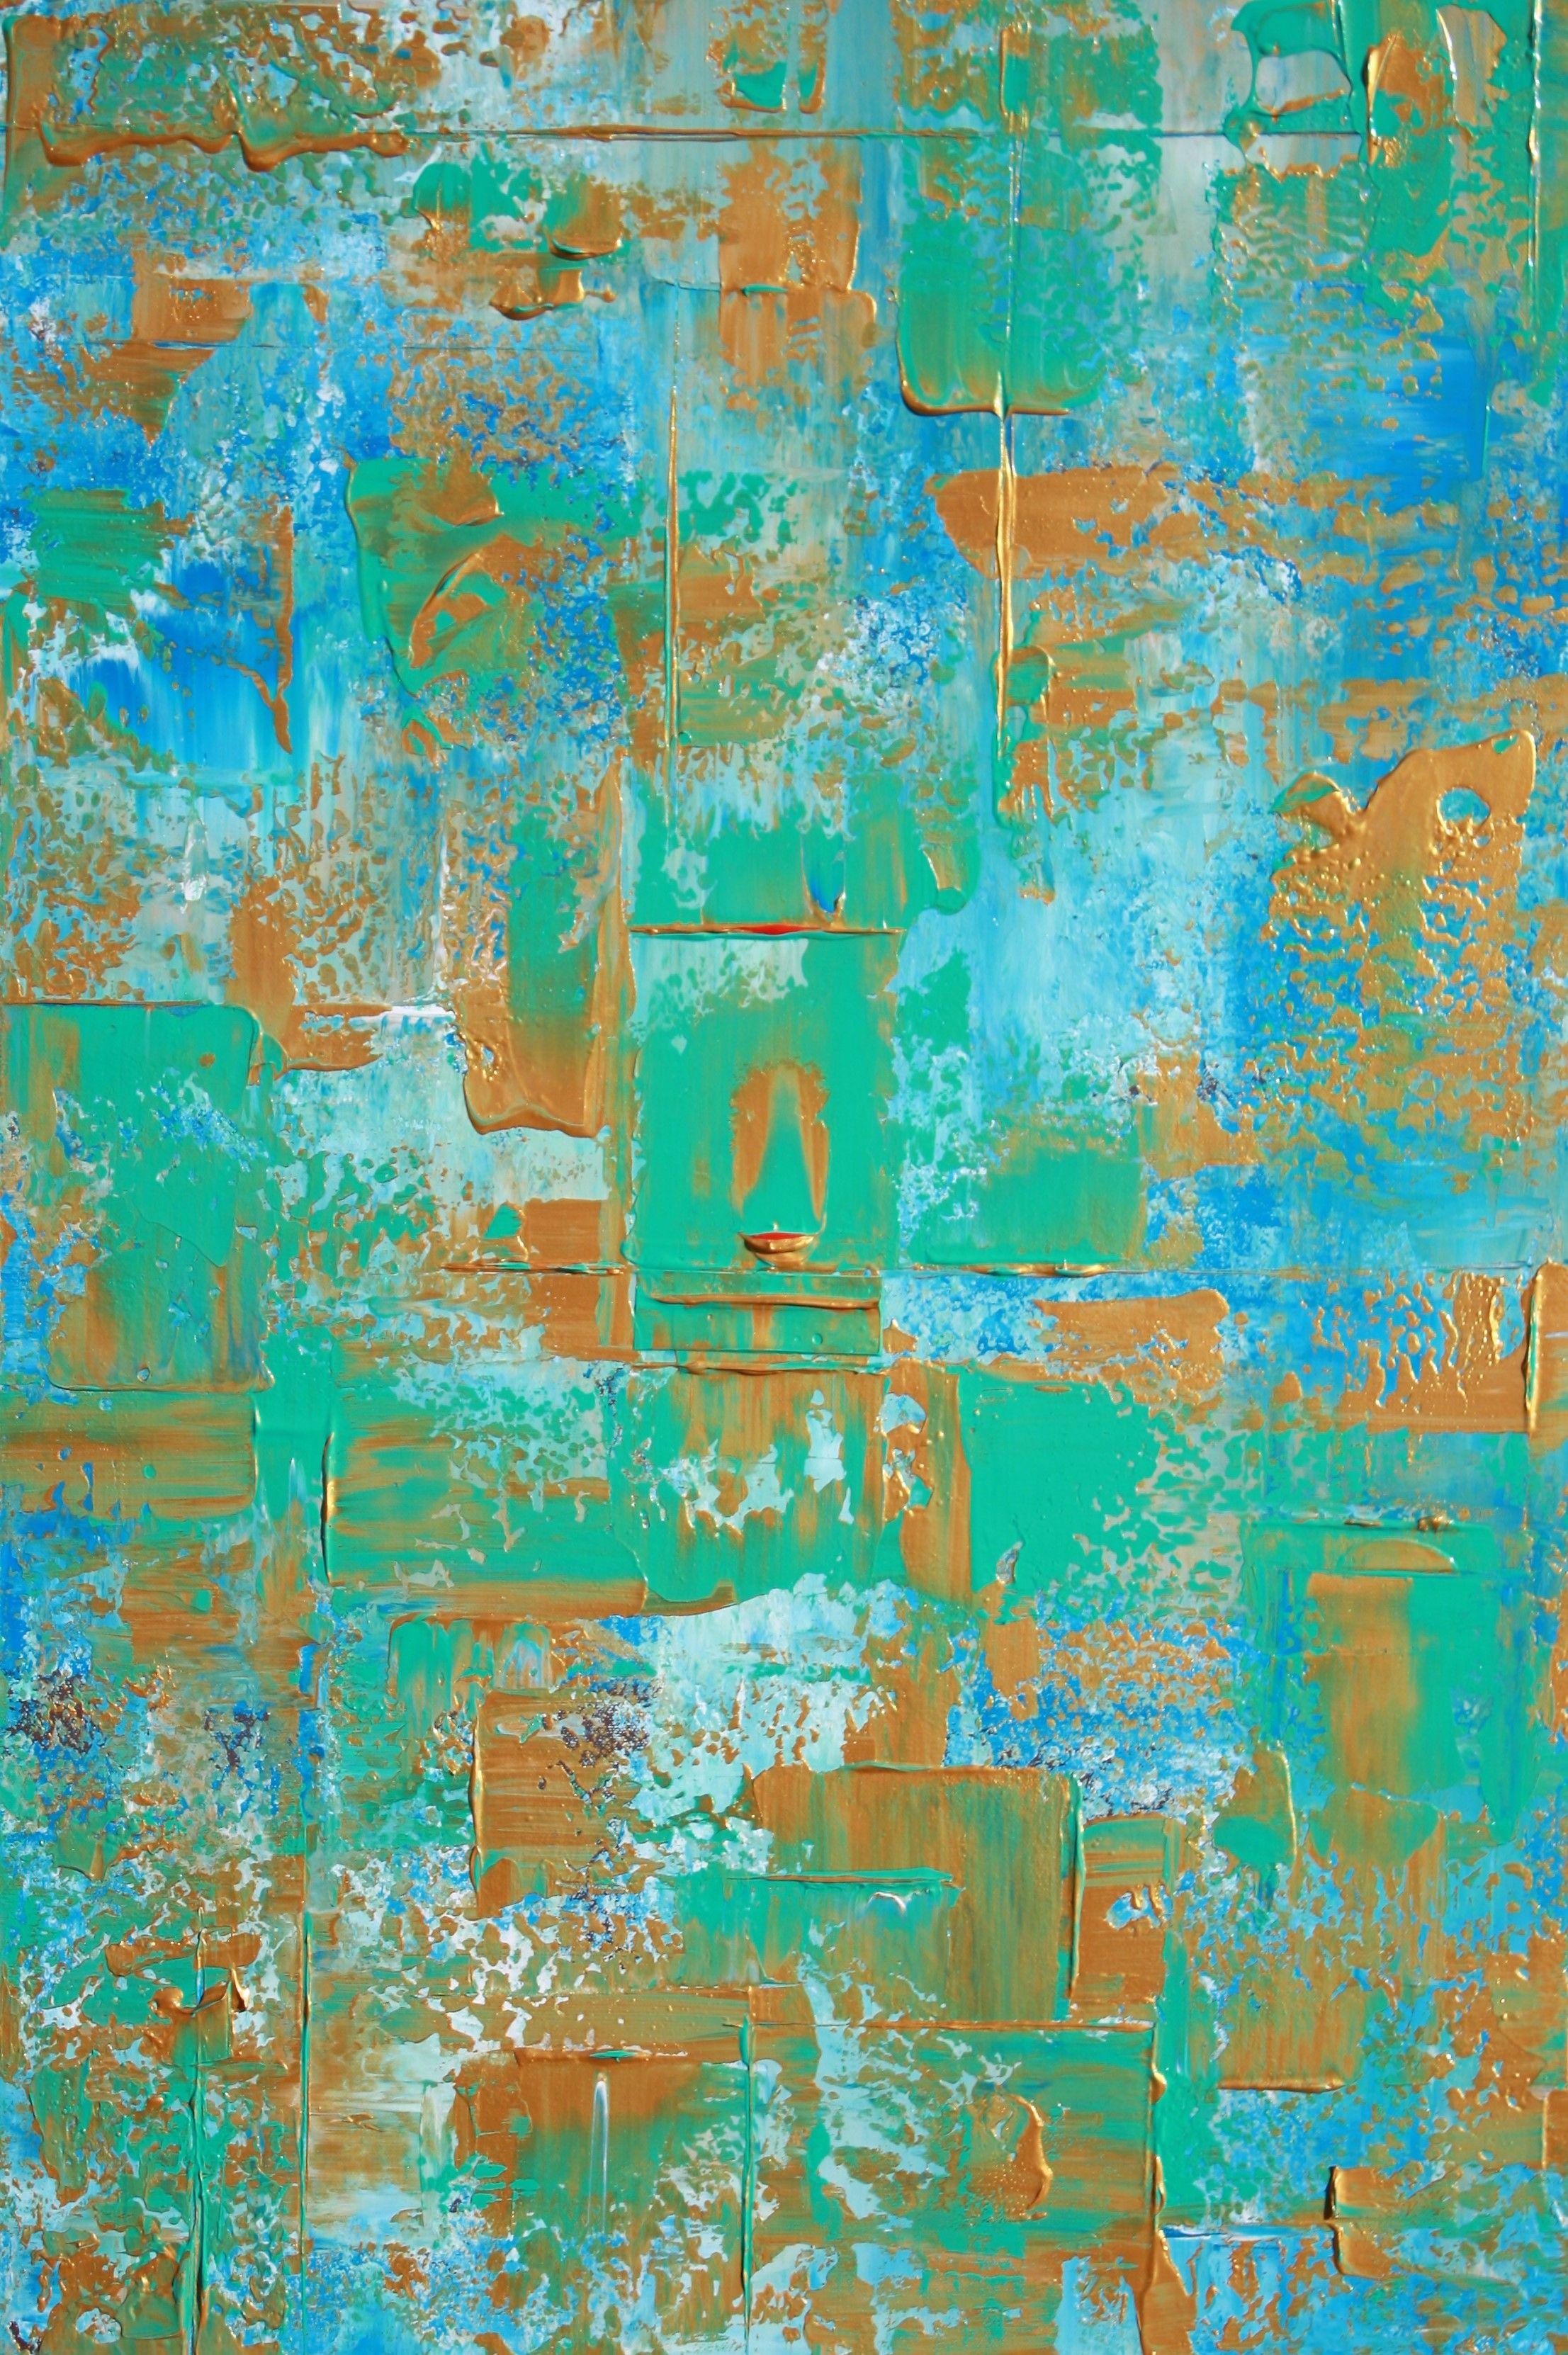 Robert Lynn Abstract Painting - Blue Teal Gold Abstract, Painting, Acrylic on Canvas